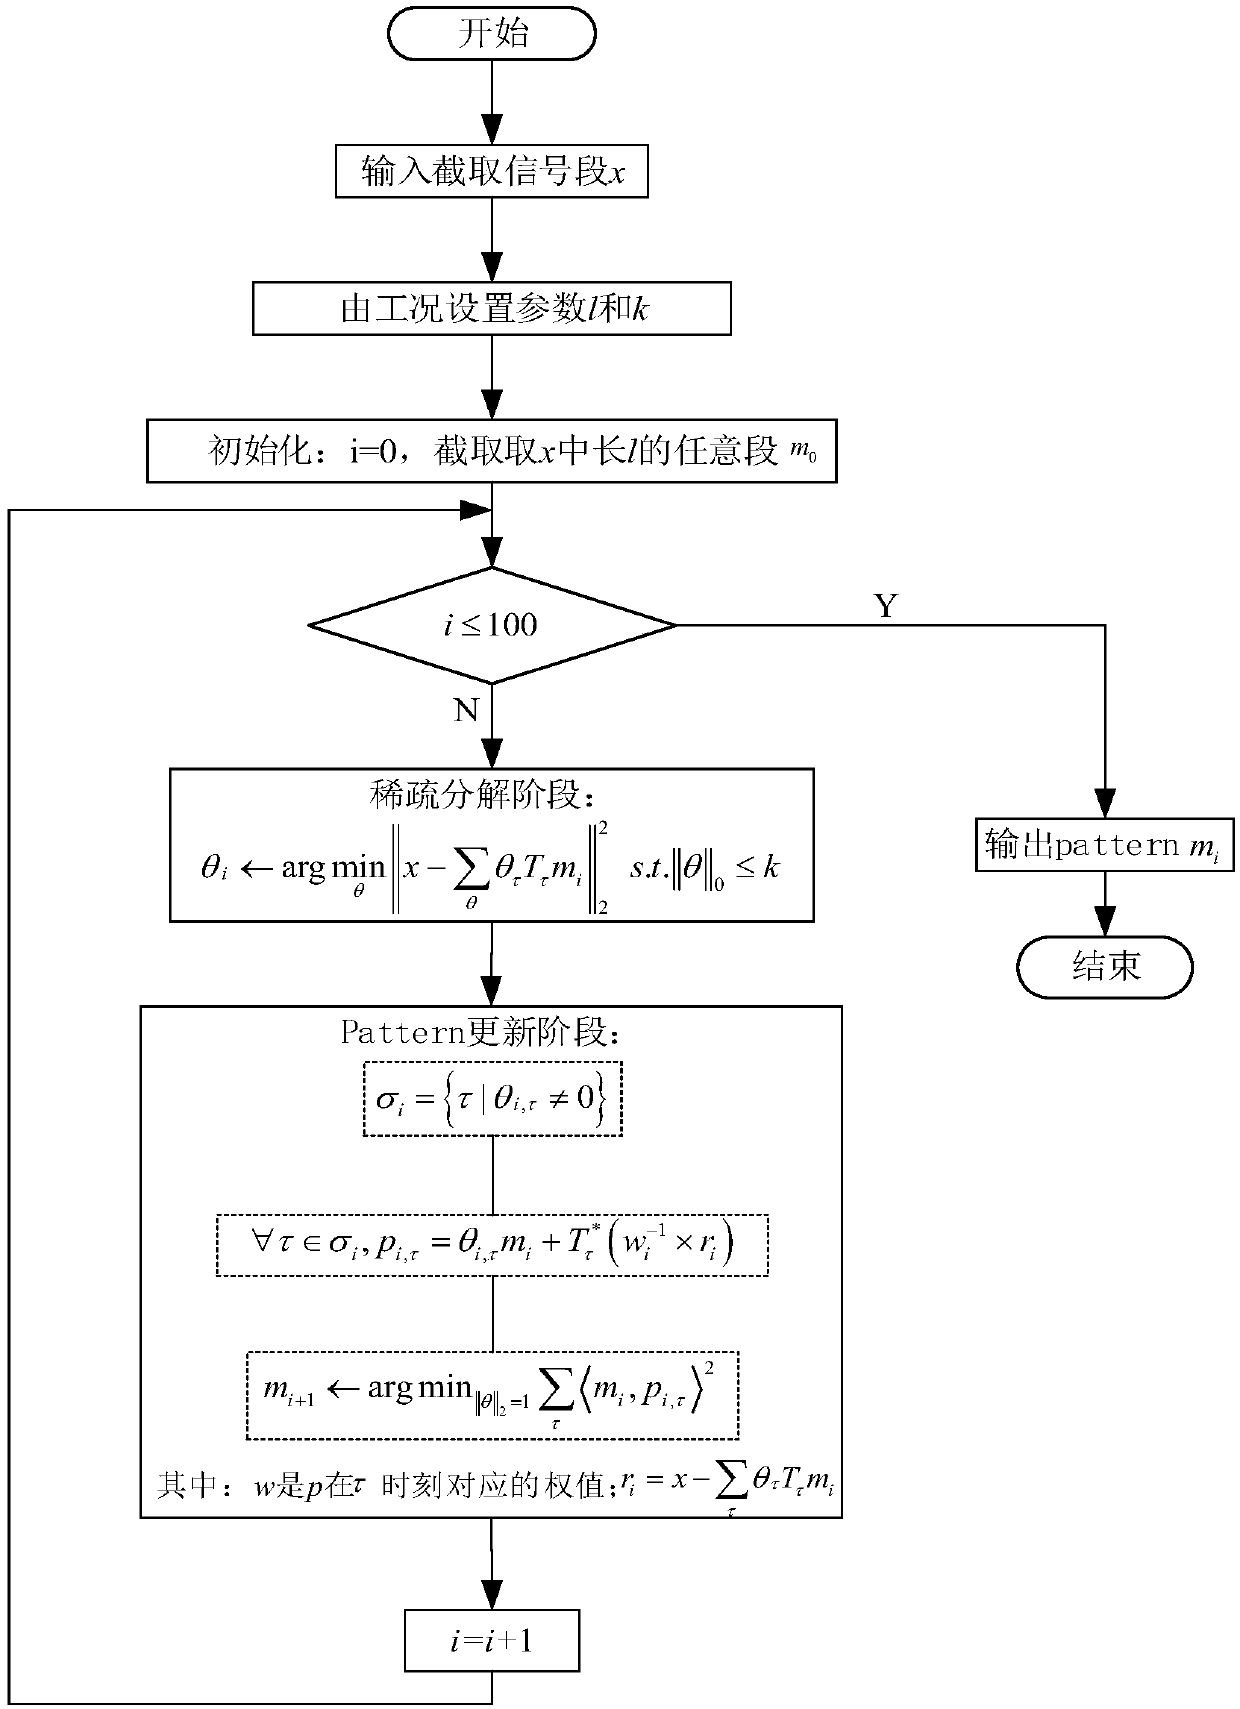 A multi-data compression tracking algorithm-based local fault remote diagnosis method for a rotary machine